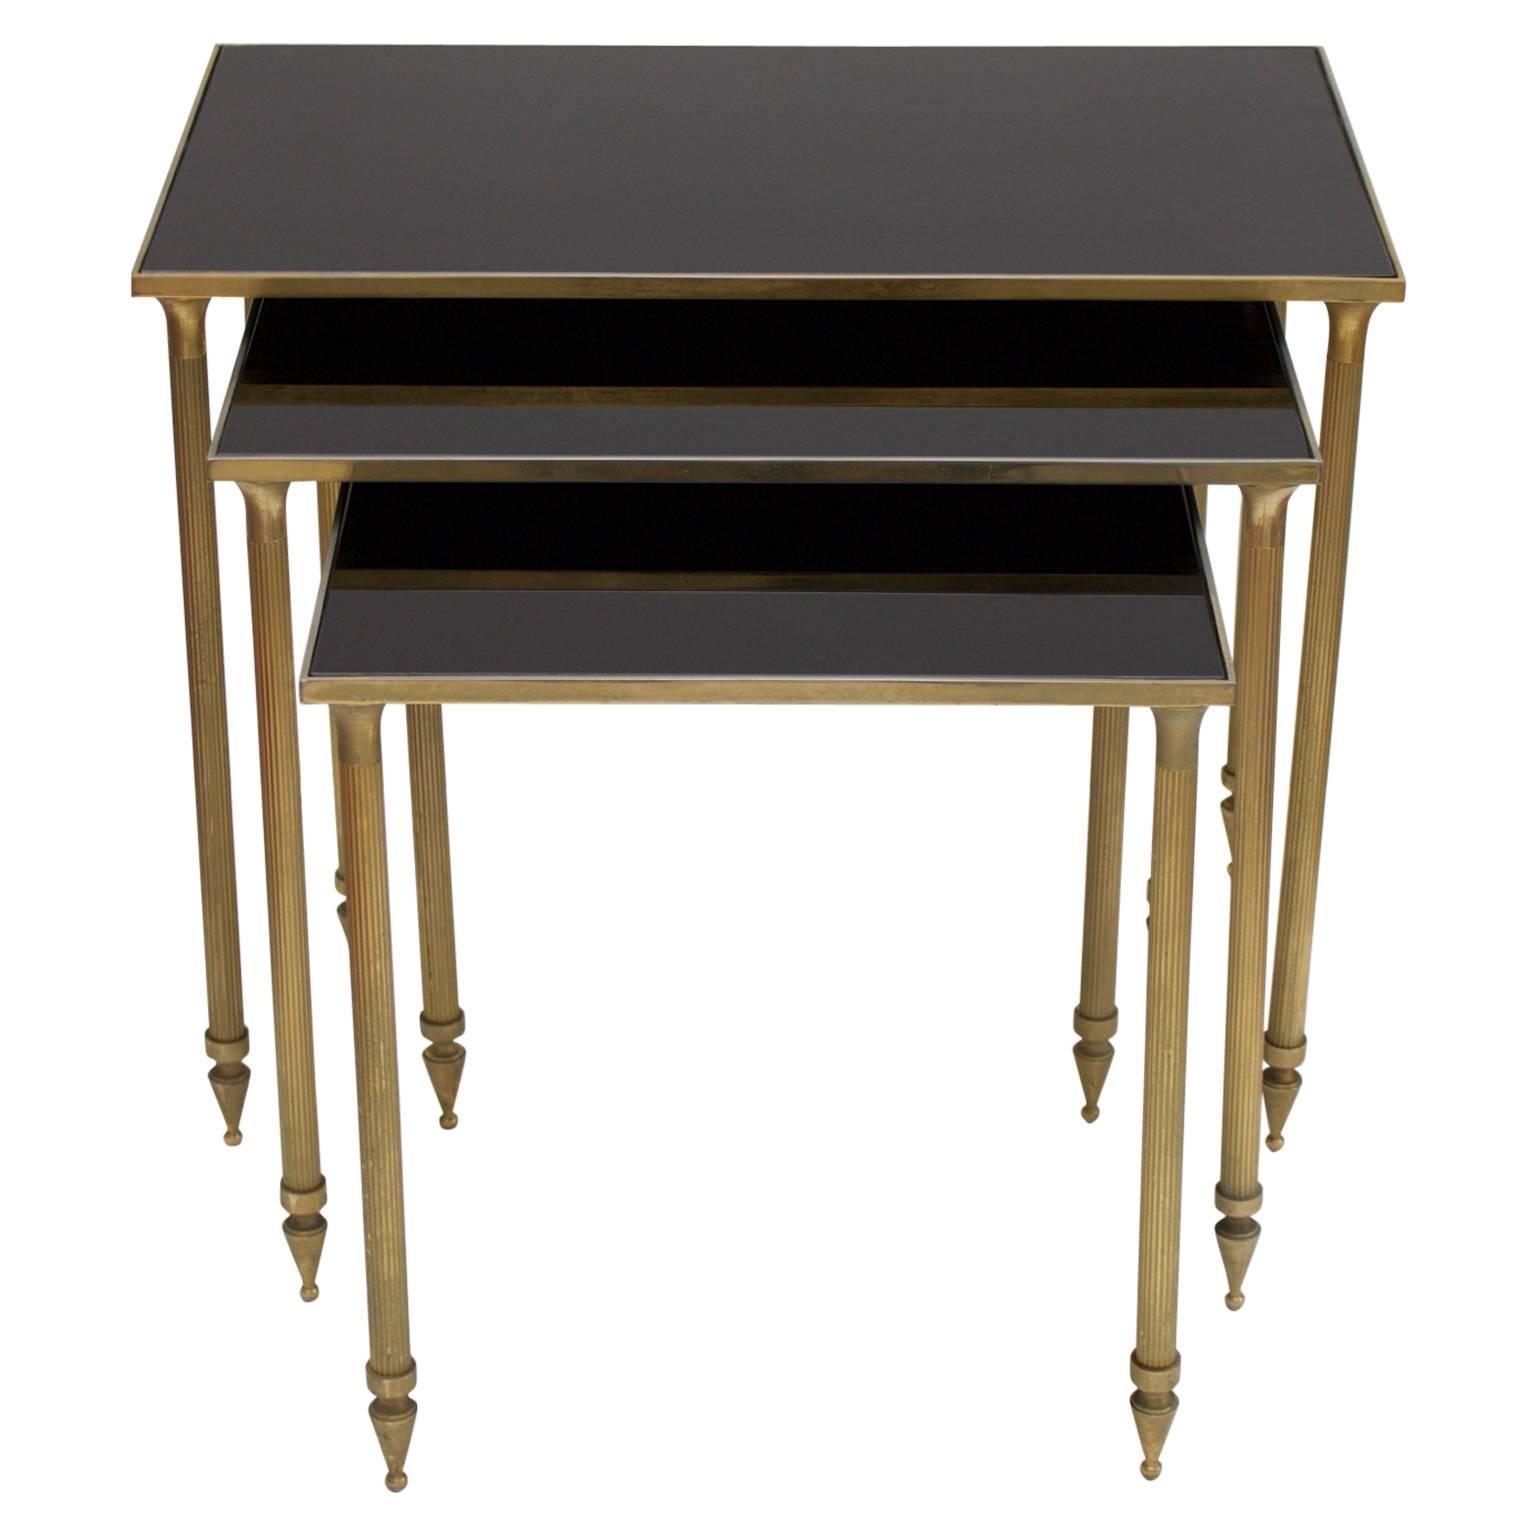 Set of Side Tables with Black Glass Tops